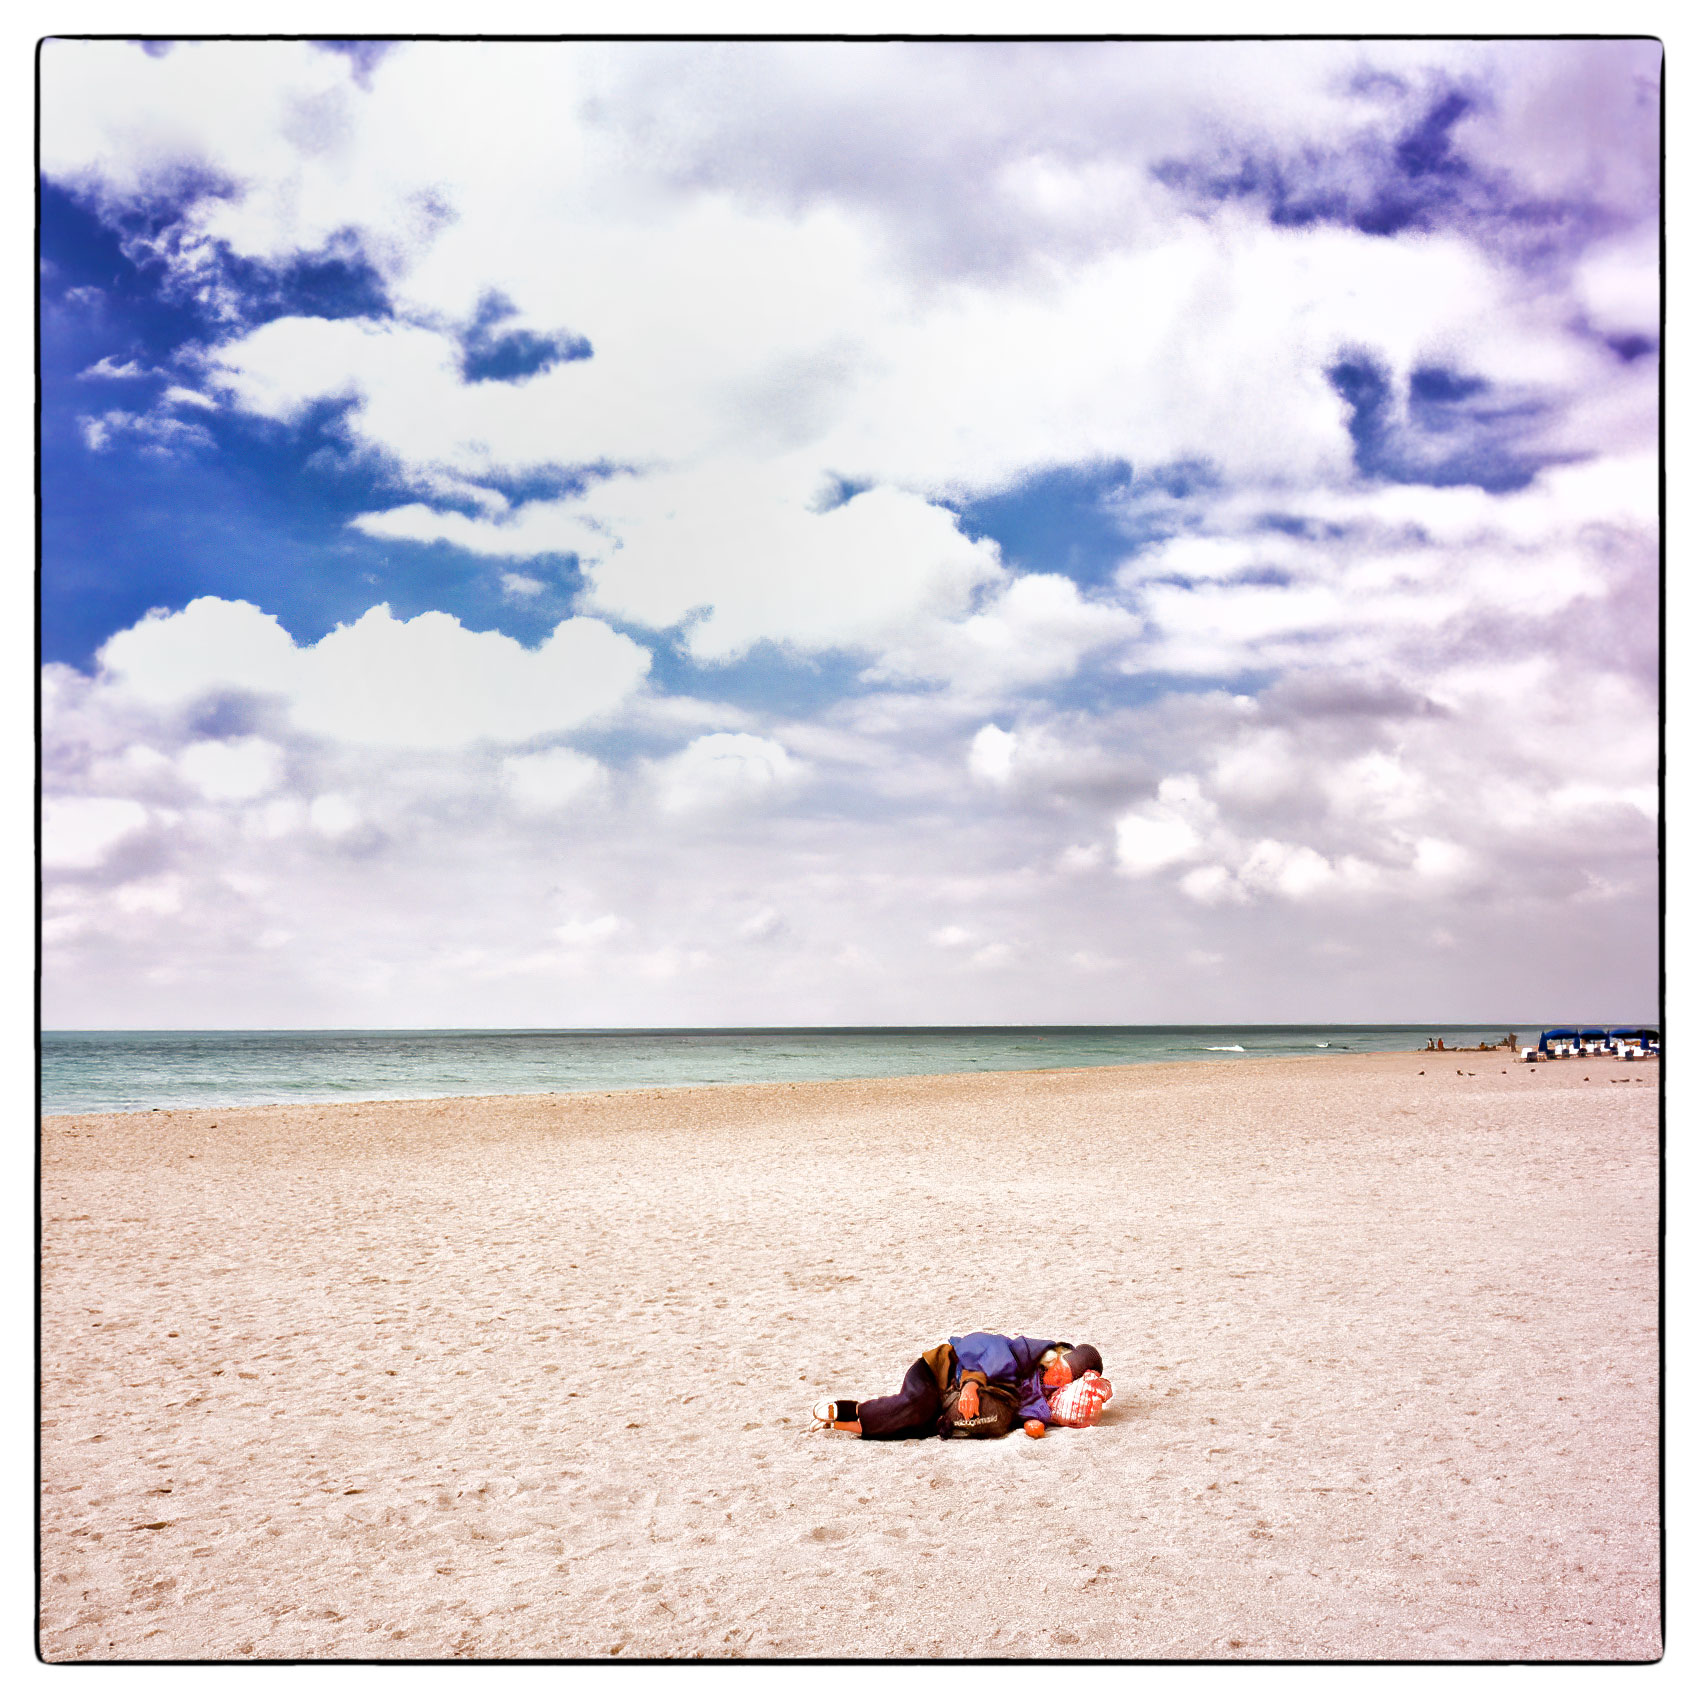 a-homeless-woman-is-surrouned-by-tropical-beauty-as-she-sleeps-in-the-early-morning-on-miami-beach